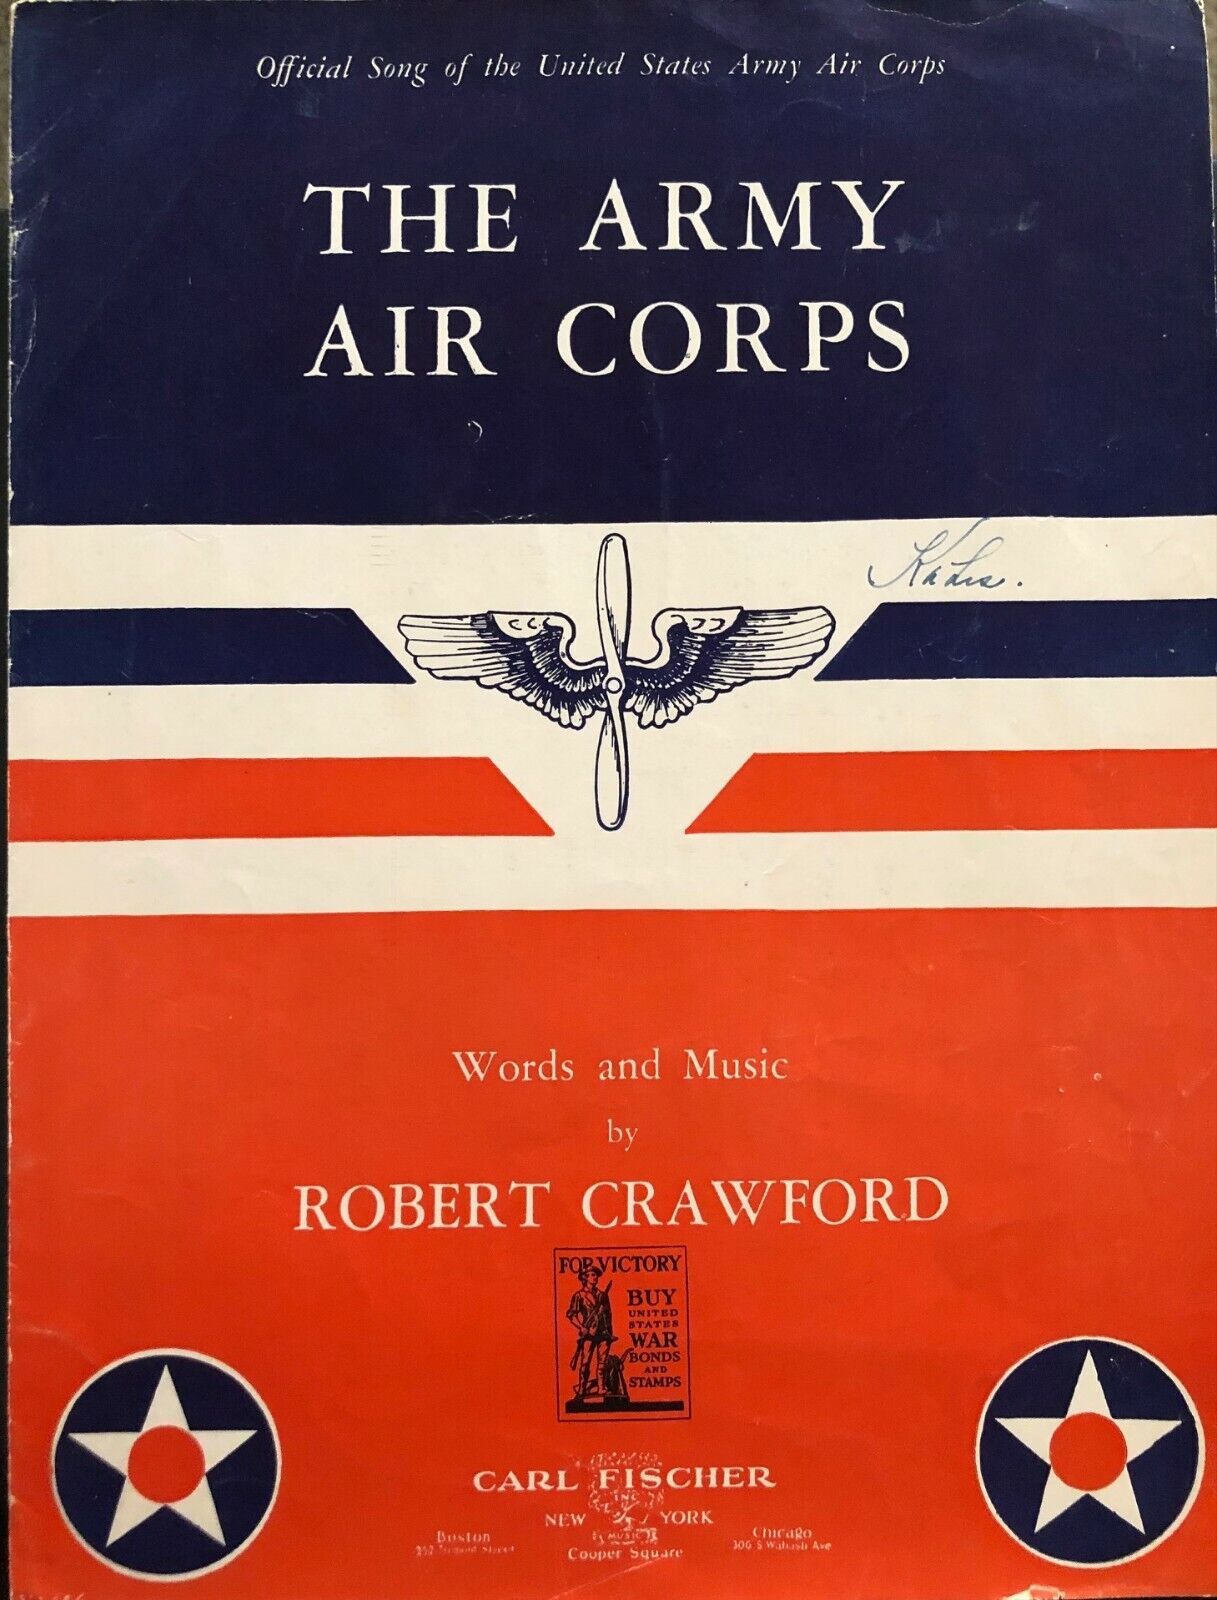 WW2 Era Official Song Book For The US Army Air Corps